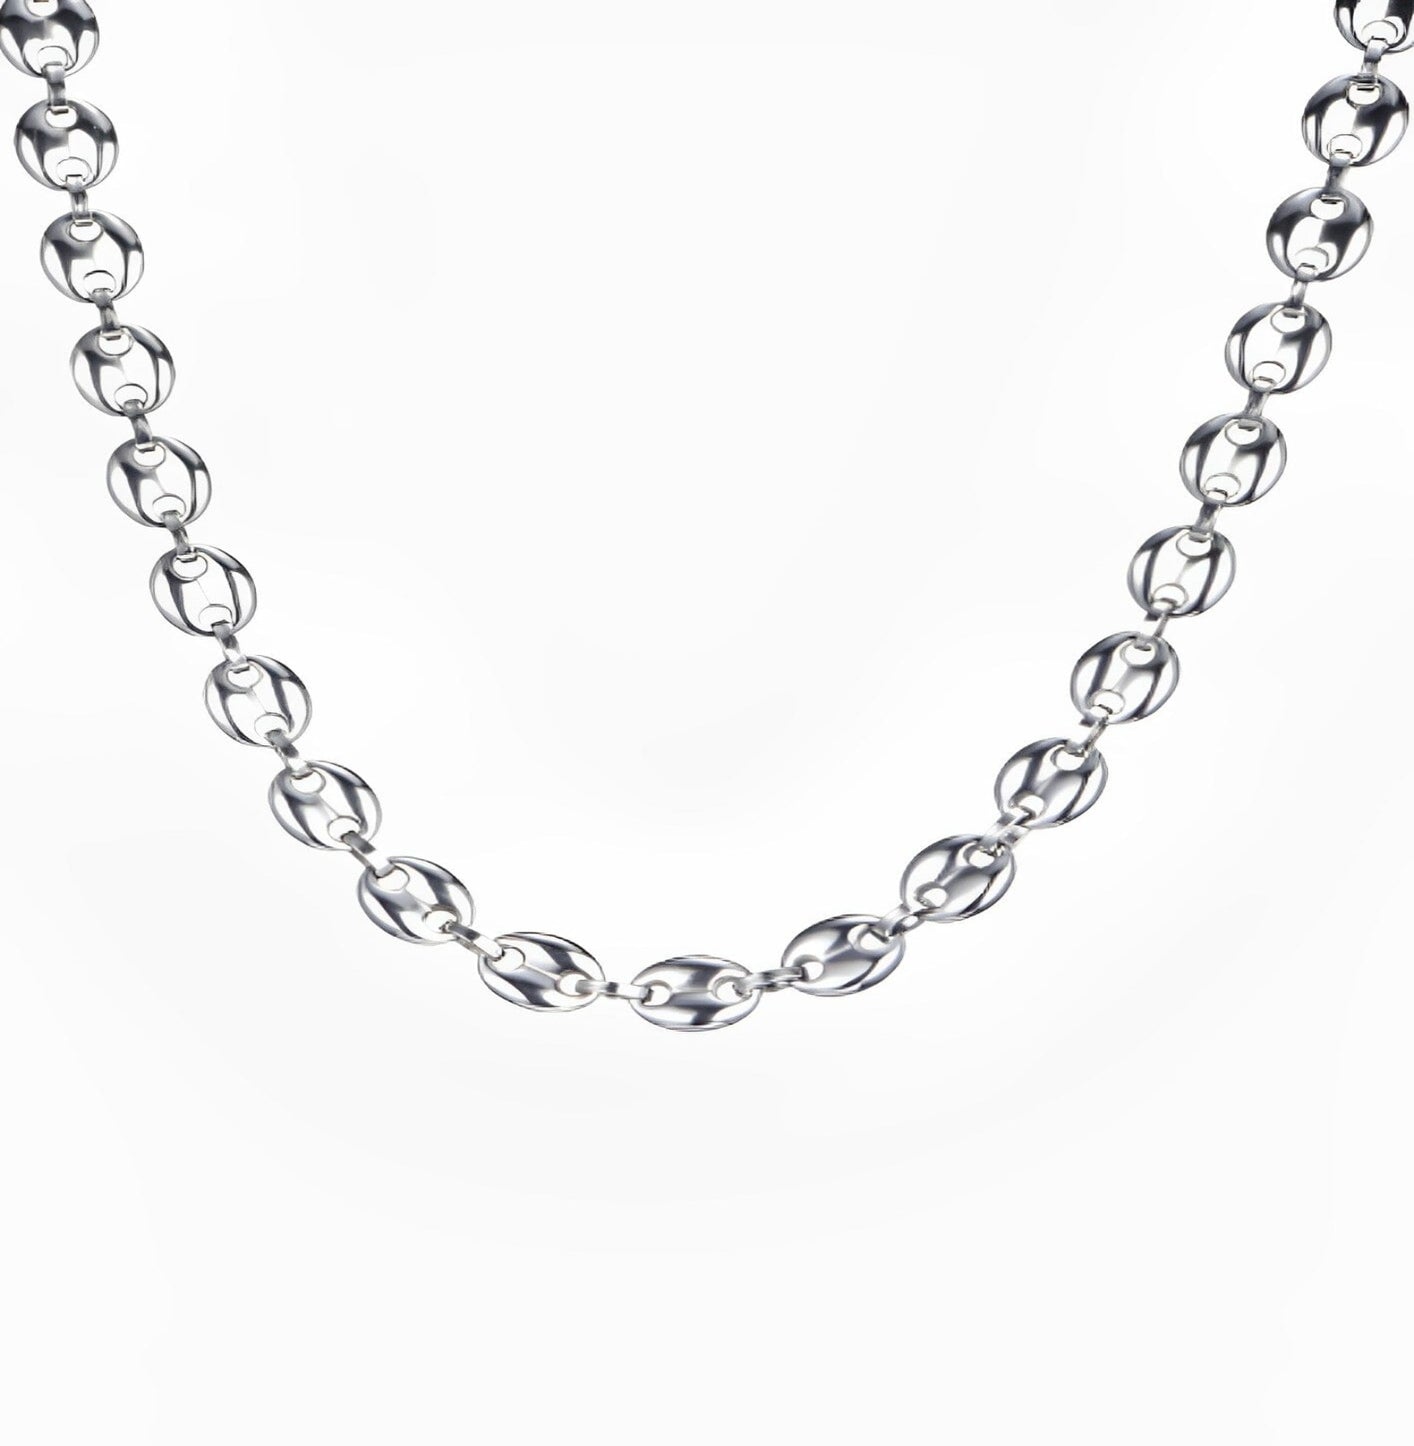 KANE NECKLACE neck Yubama Jewelry Online Store - The Elegant Designs of Gold and Silver ! 